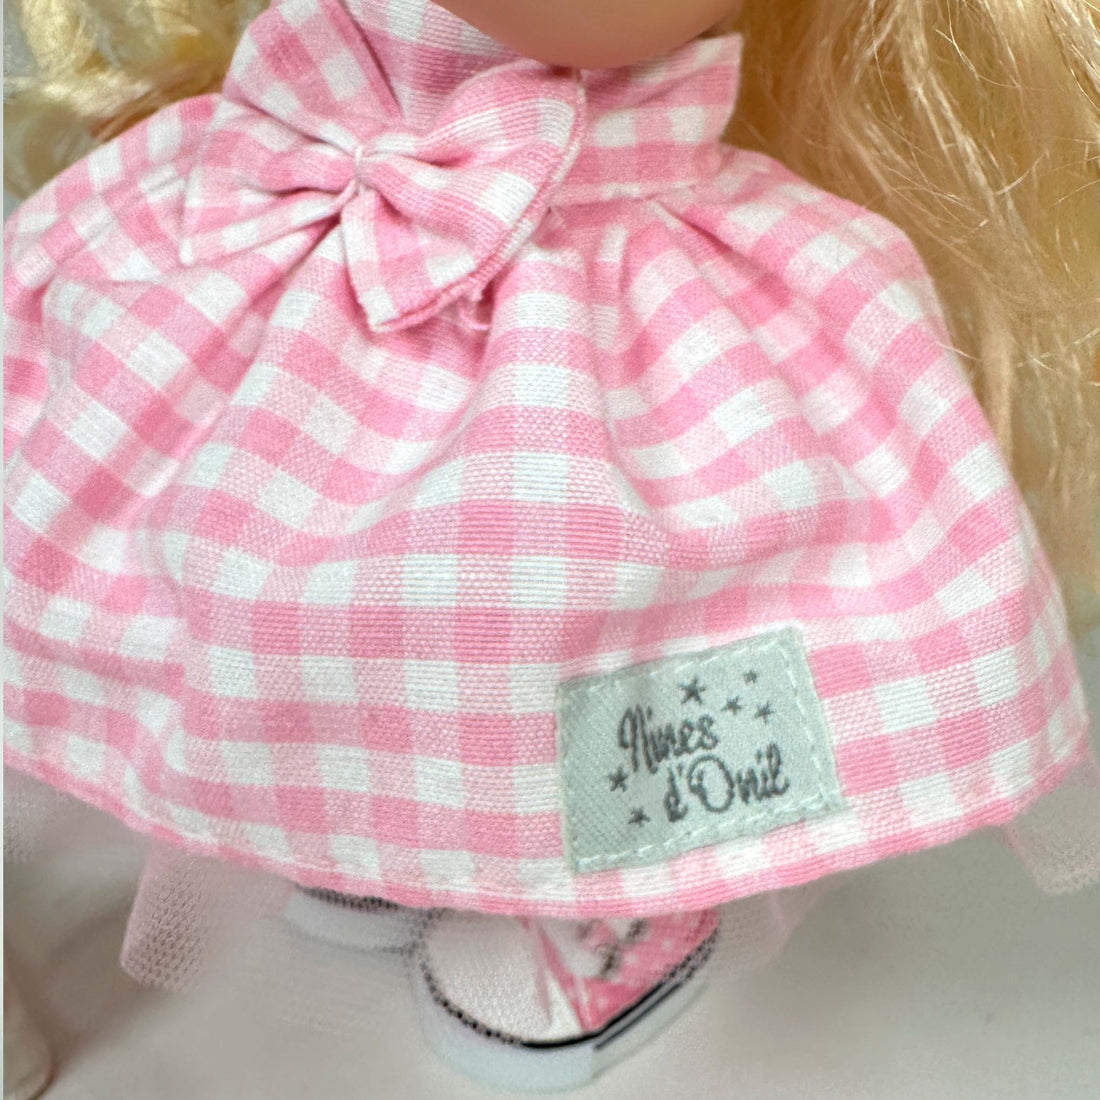 Handcrafted Collectible Mia PInk Gingham Doll with Puppy (3405) by Nines D&